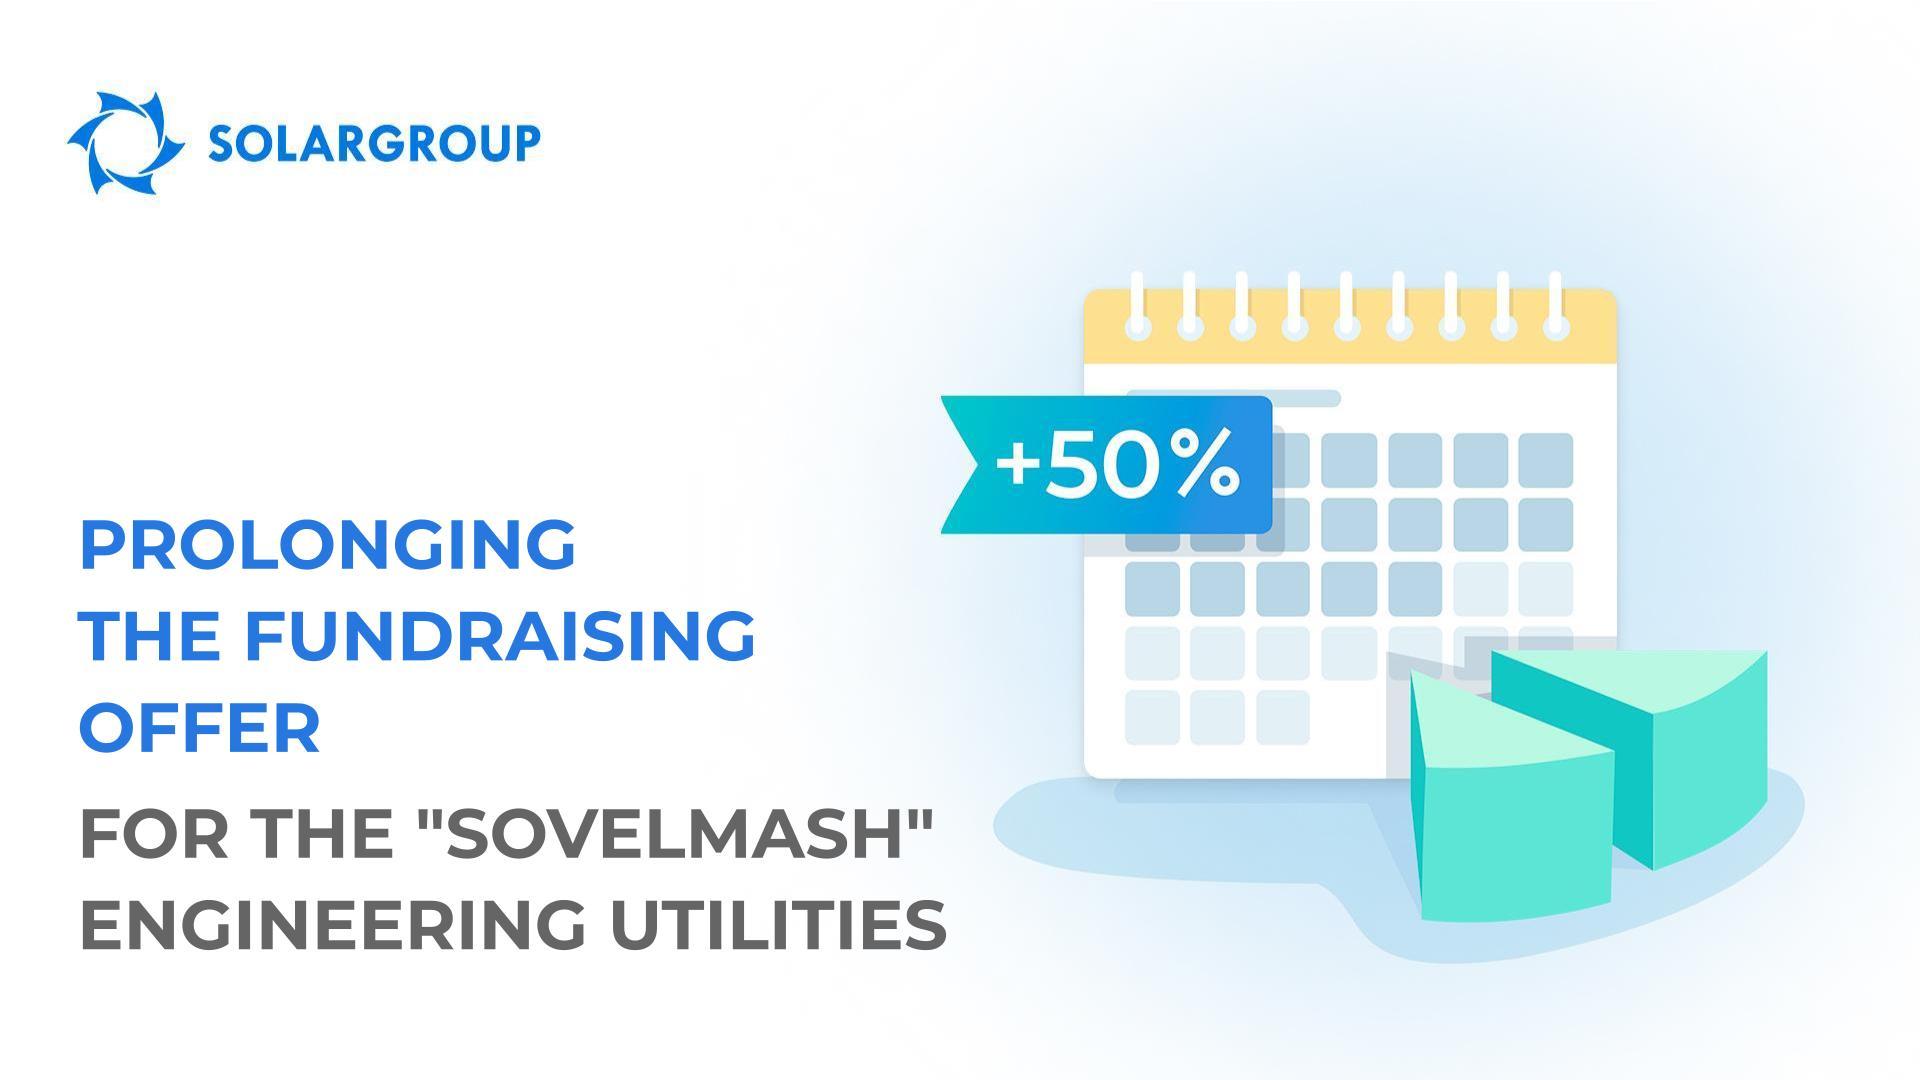 Prolonging the fundraising offer for the "Sovelmash" engineering utilities + expanding opportunities